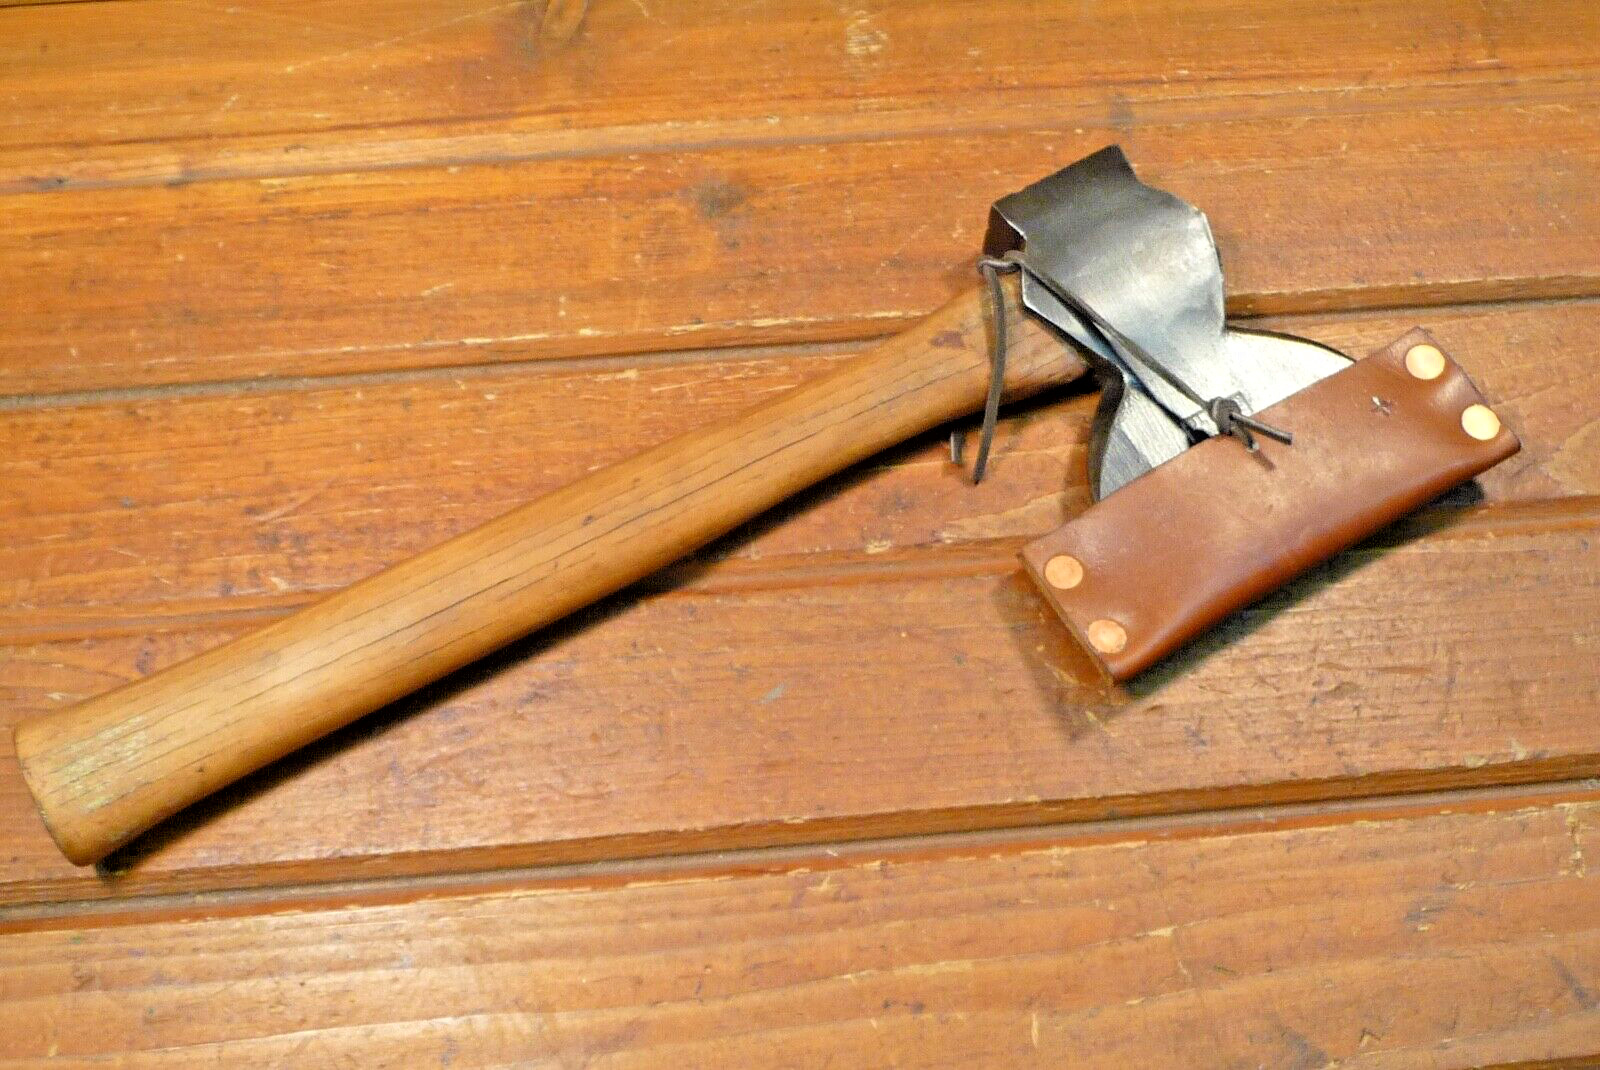 Vintage Plumb Broad Hewing Hatchet. Clean, sharp and with Leather Sheath